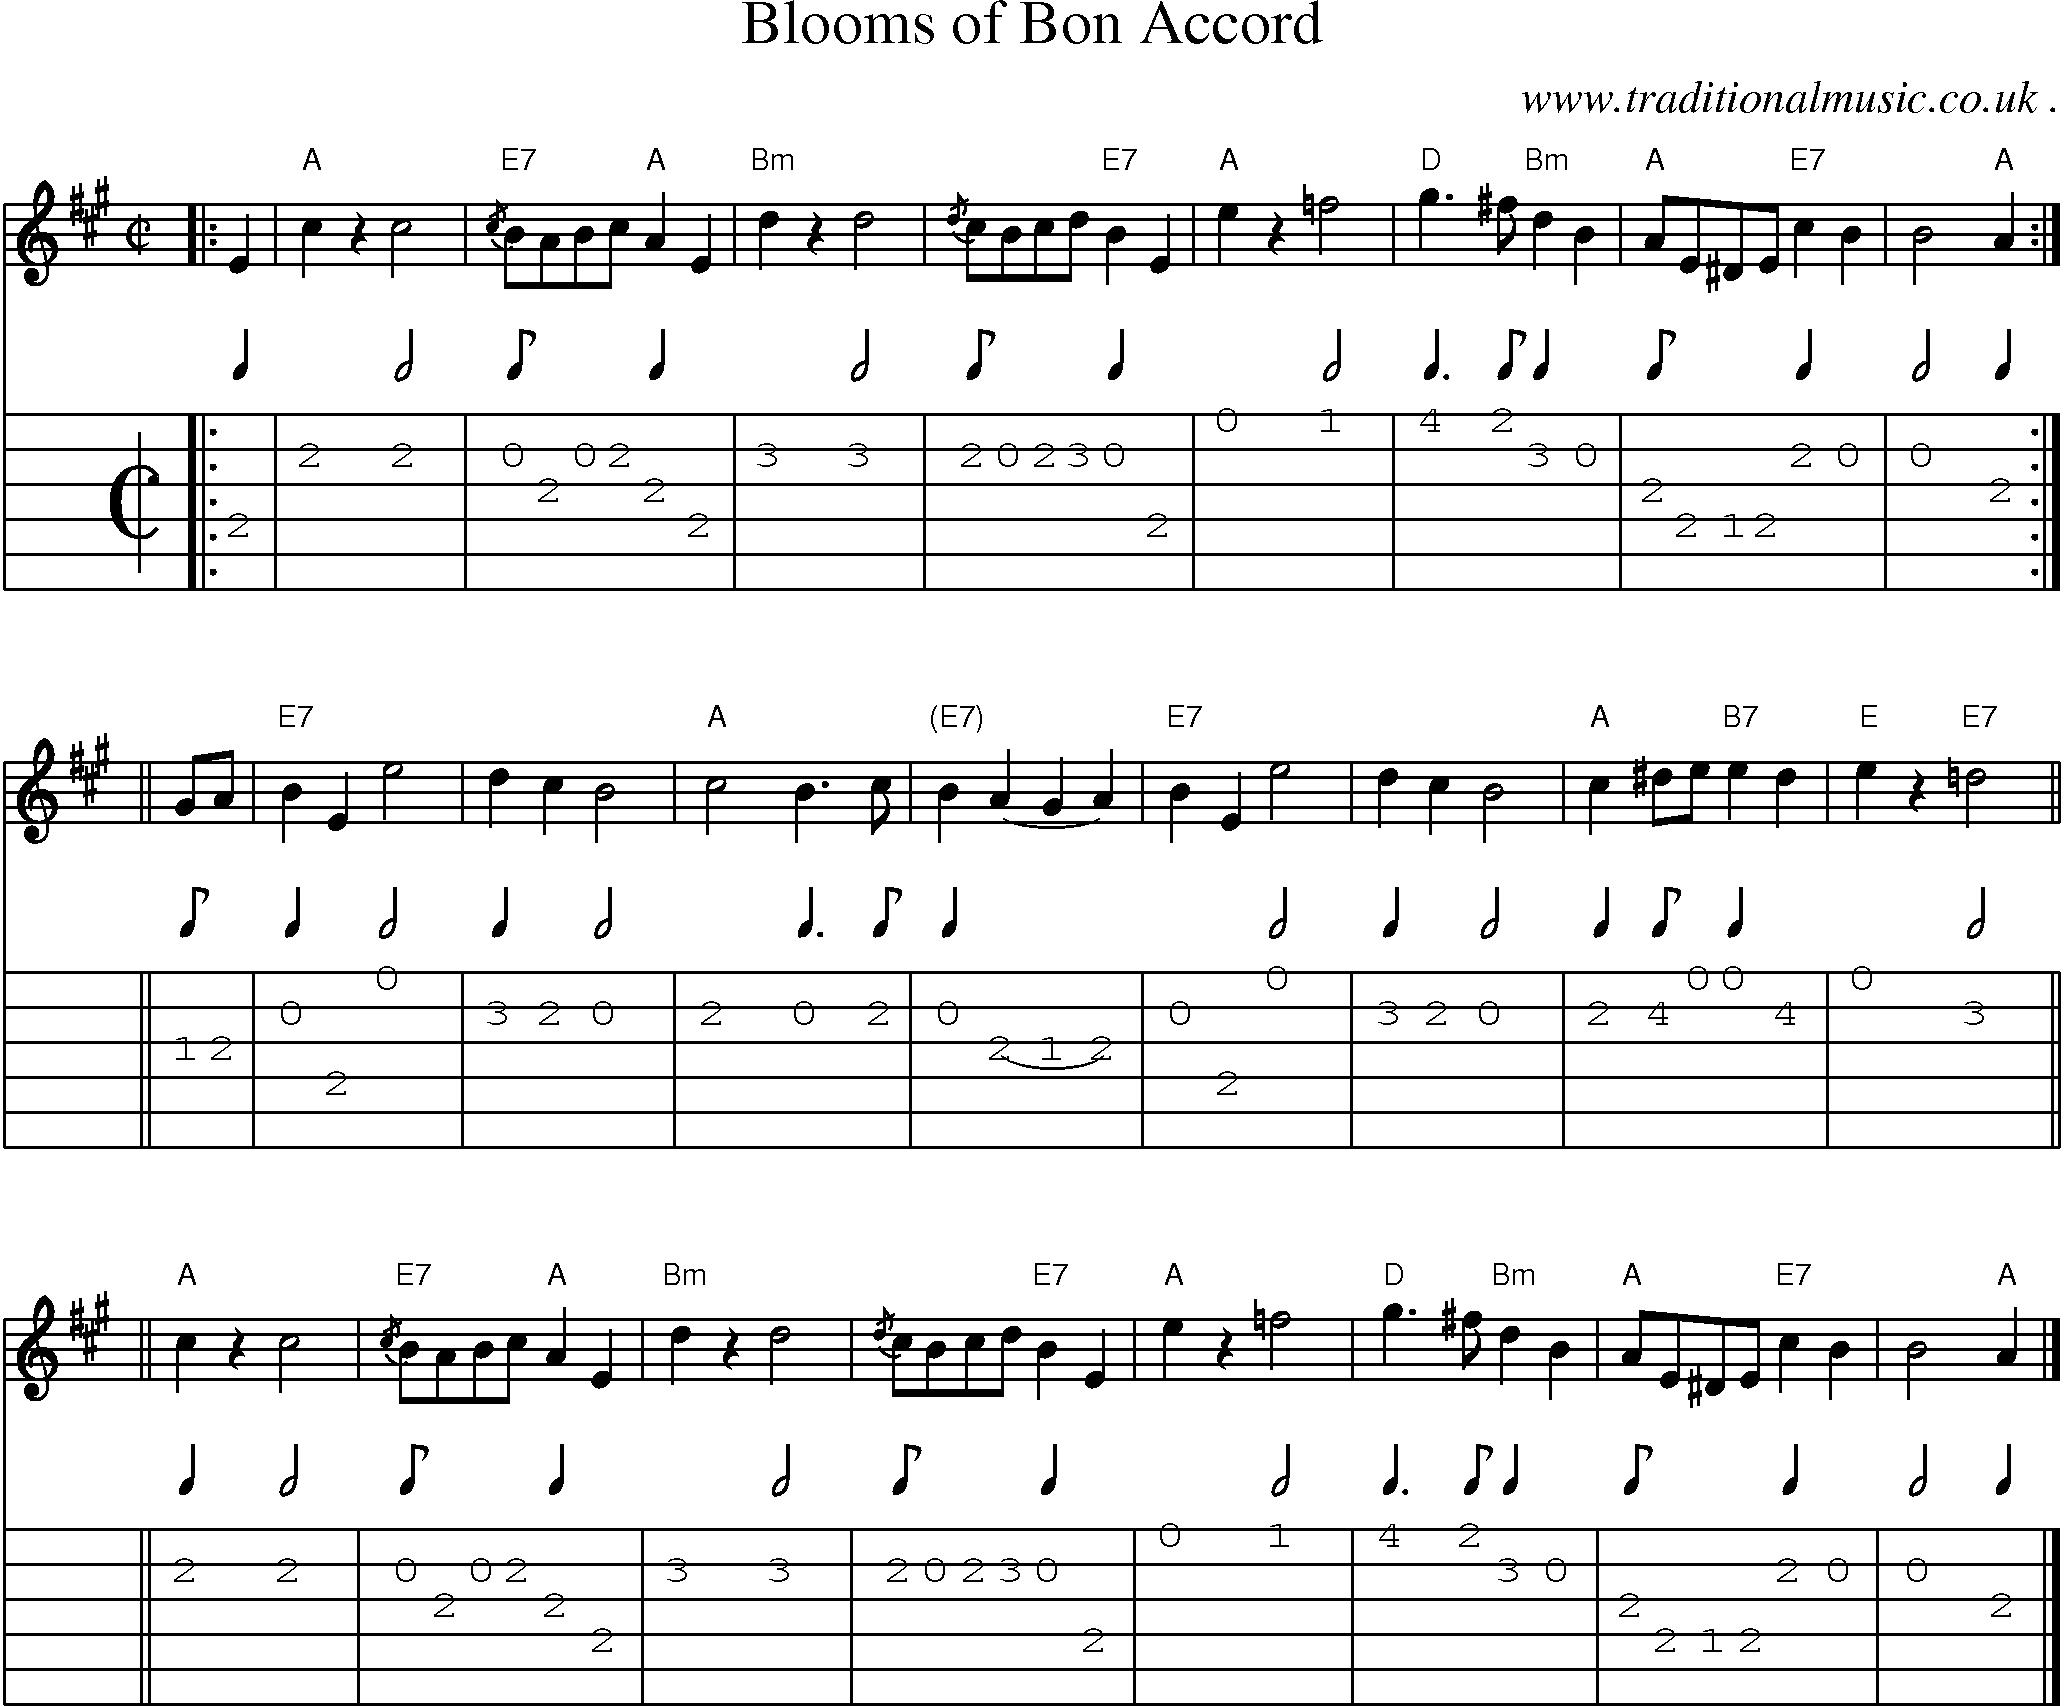 Sheet-music  score, Chords and Guitar Tabs for Blooms Of Bon Accord